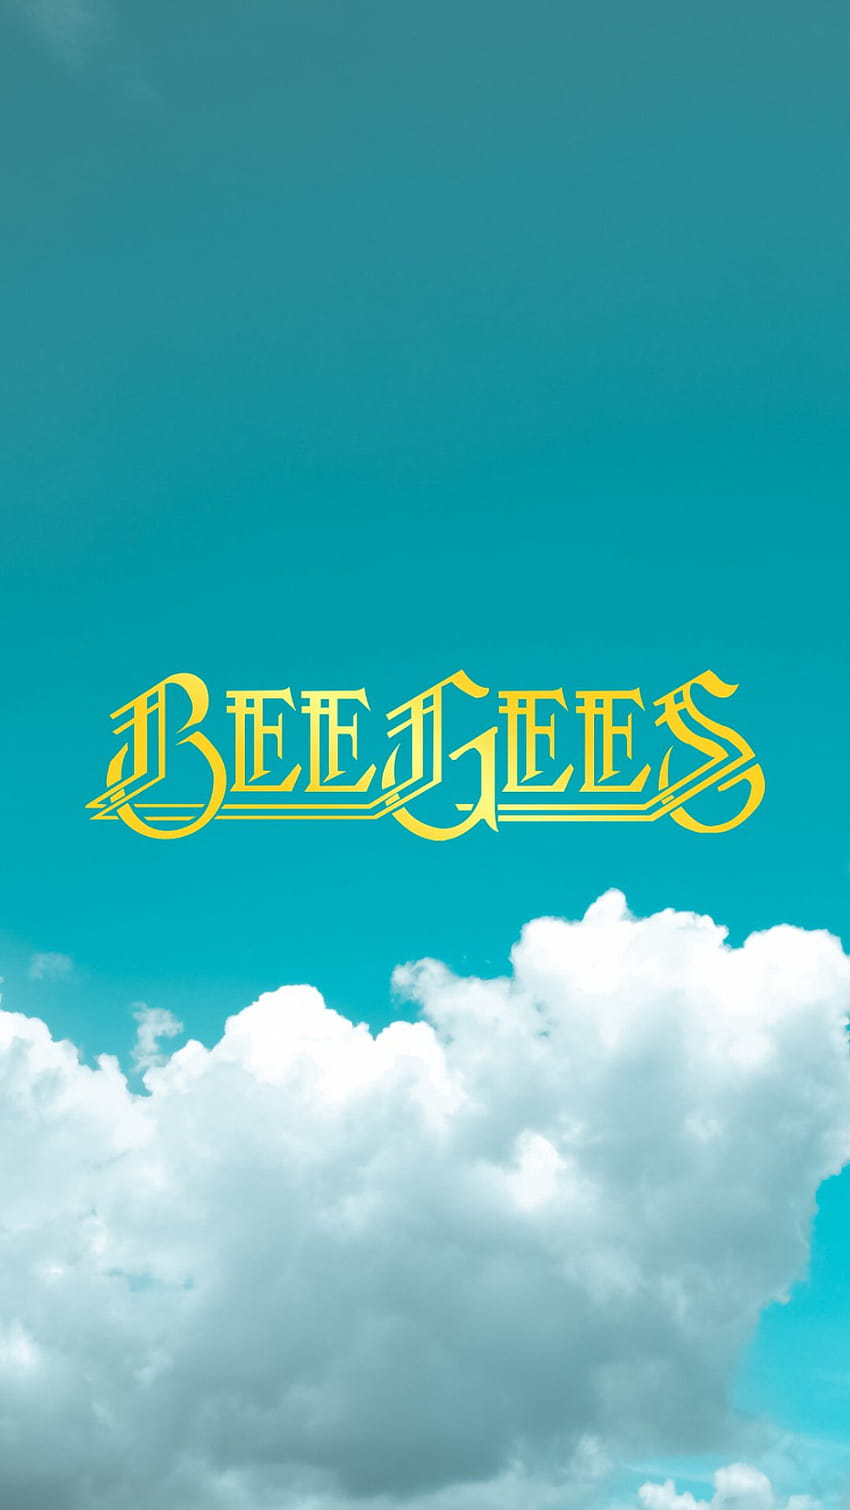 Bee Gees on Twitter in 2020, the bee gees logo HD phone wallpaper